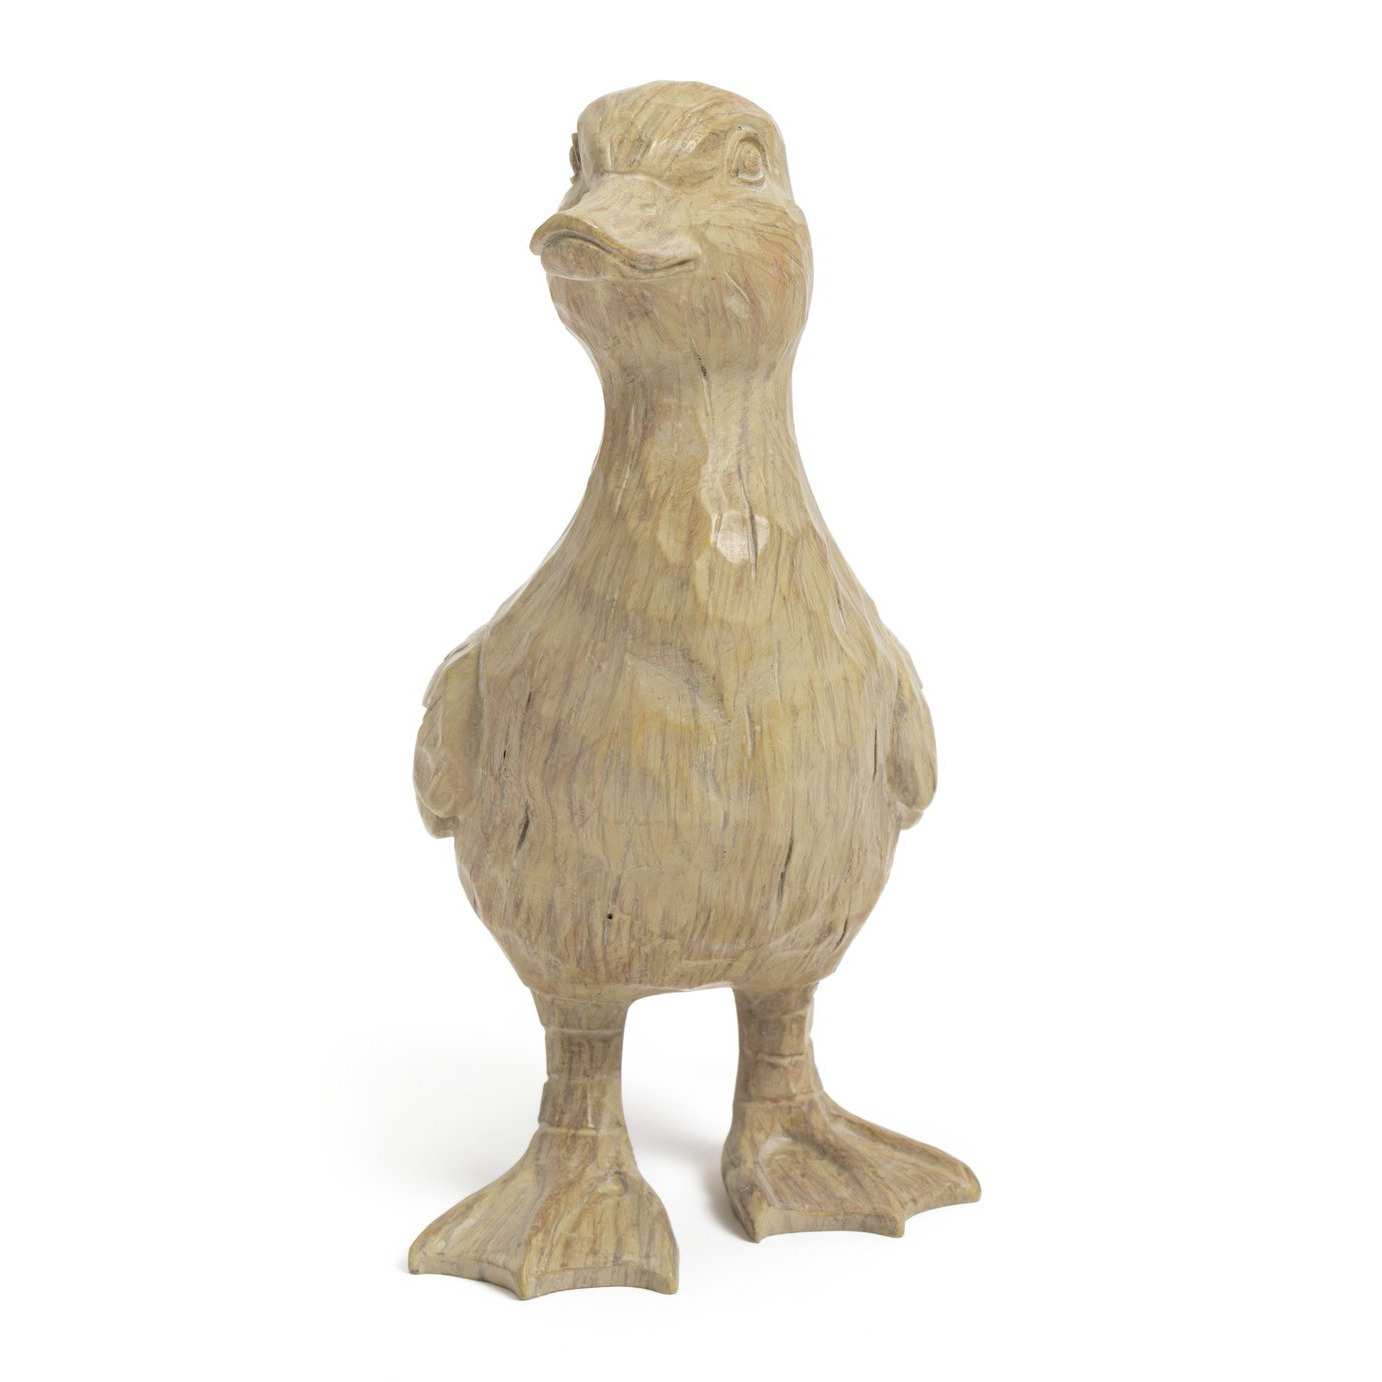 Argos Home Wooden Duckling Ornament - Natural - image 1